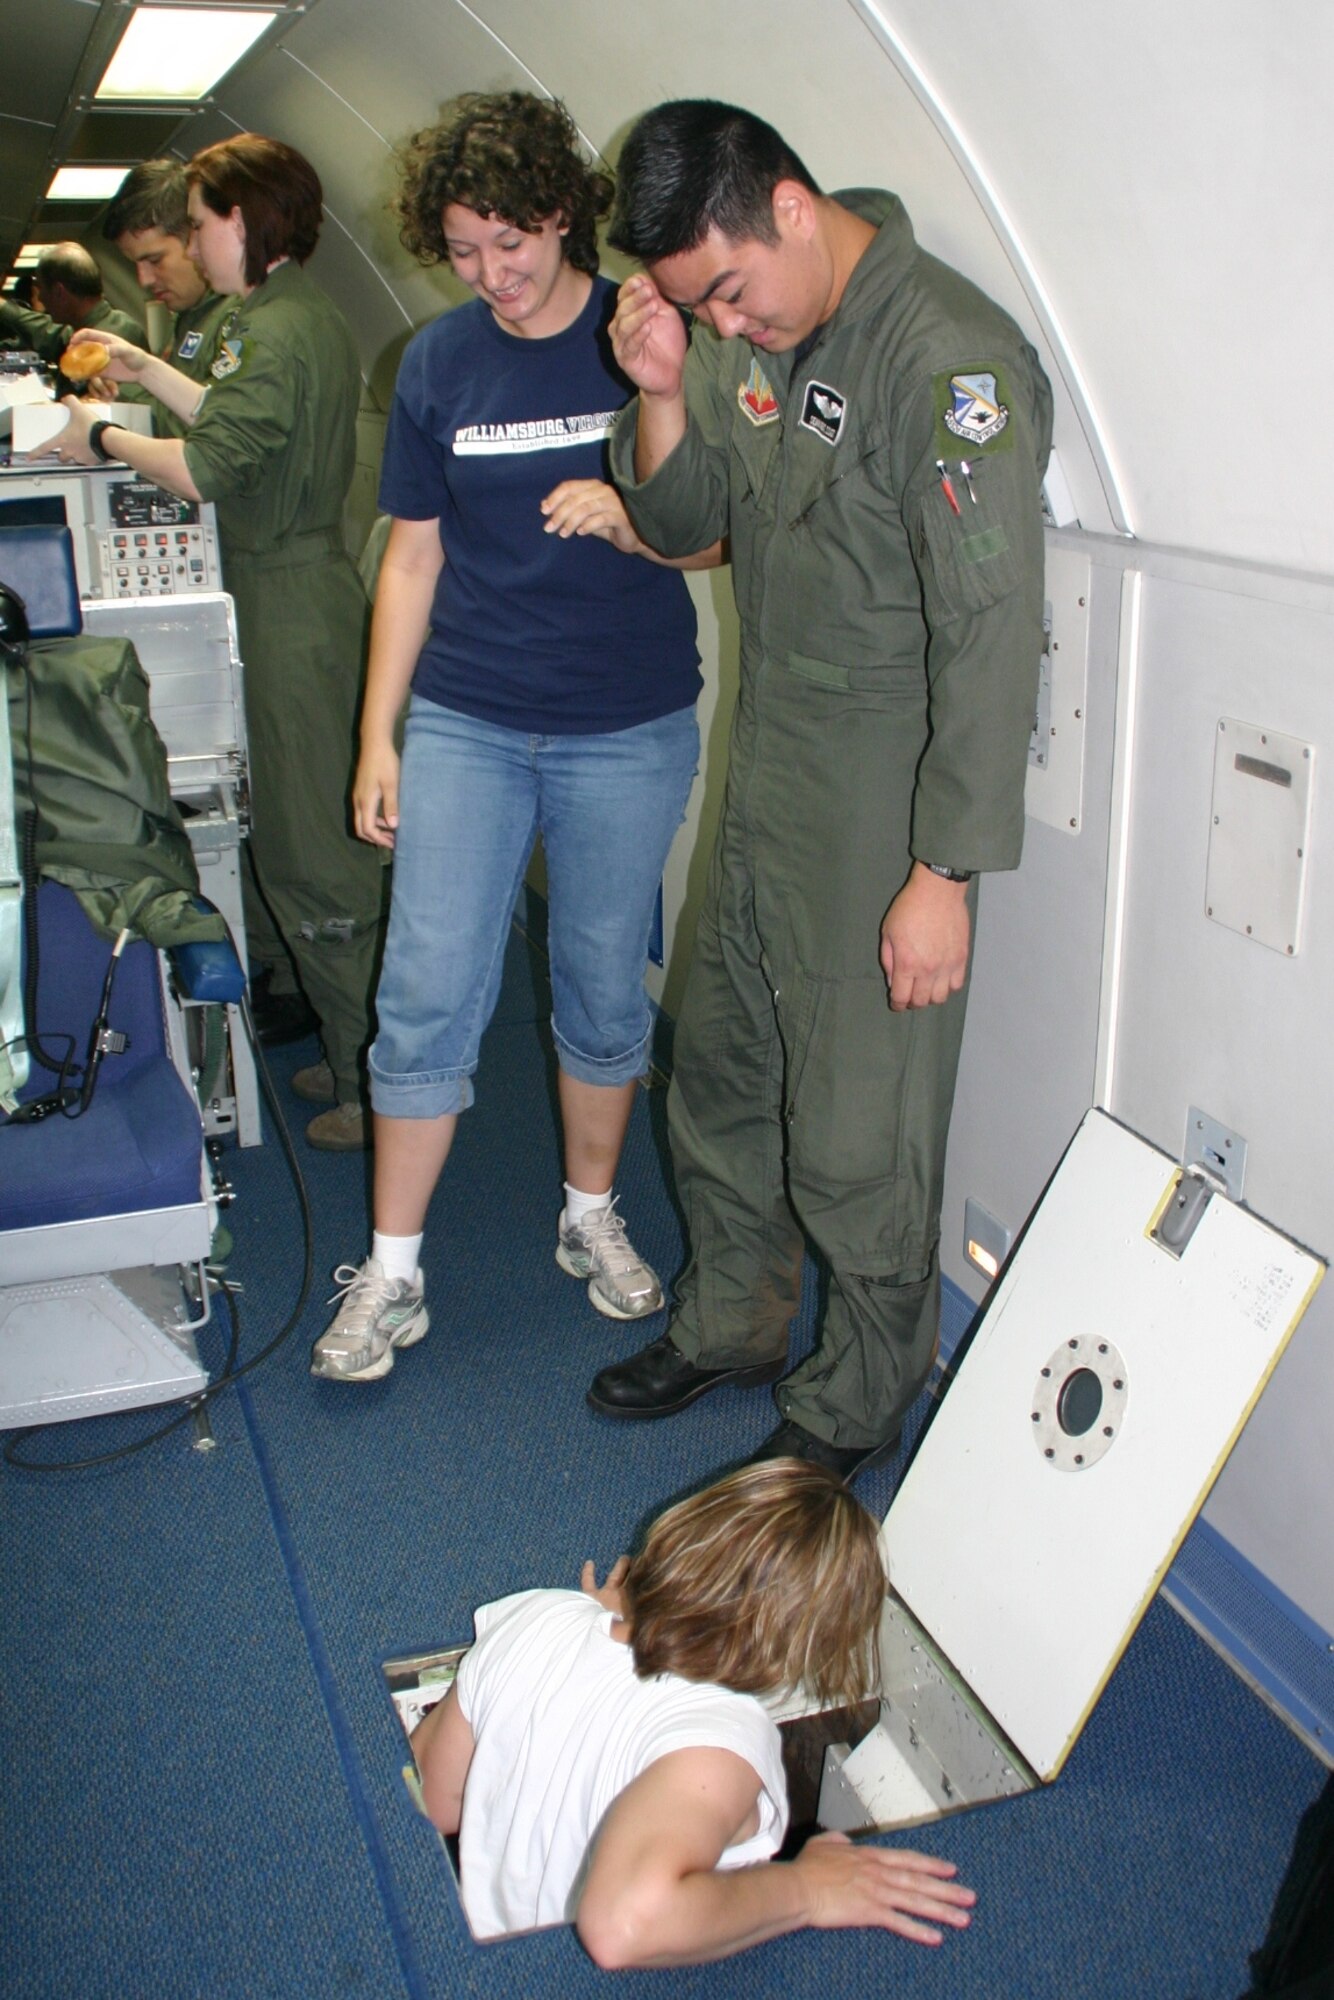 Ms. Misty Huch prepares to take a tour of the lower lobe of the aircraft during pre-flight preparations. All of the spouses were eager to see and learn as much as possible during the experience. Photo courtesy of 1st Lt. Kinder Blacke.